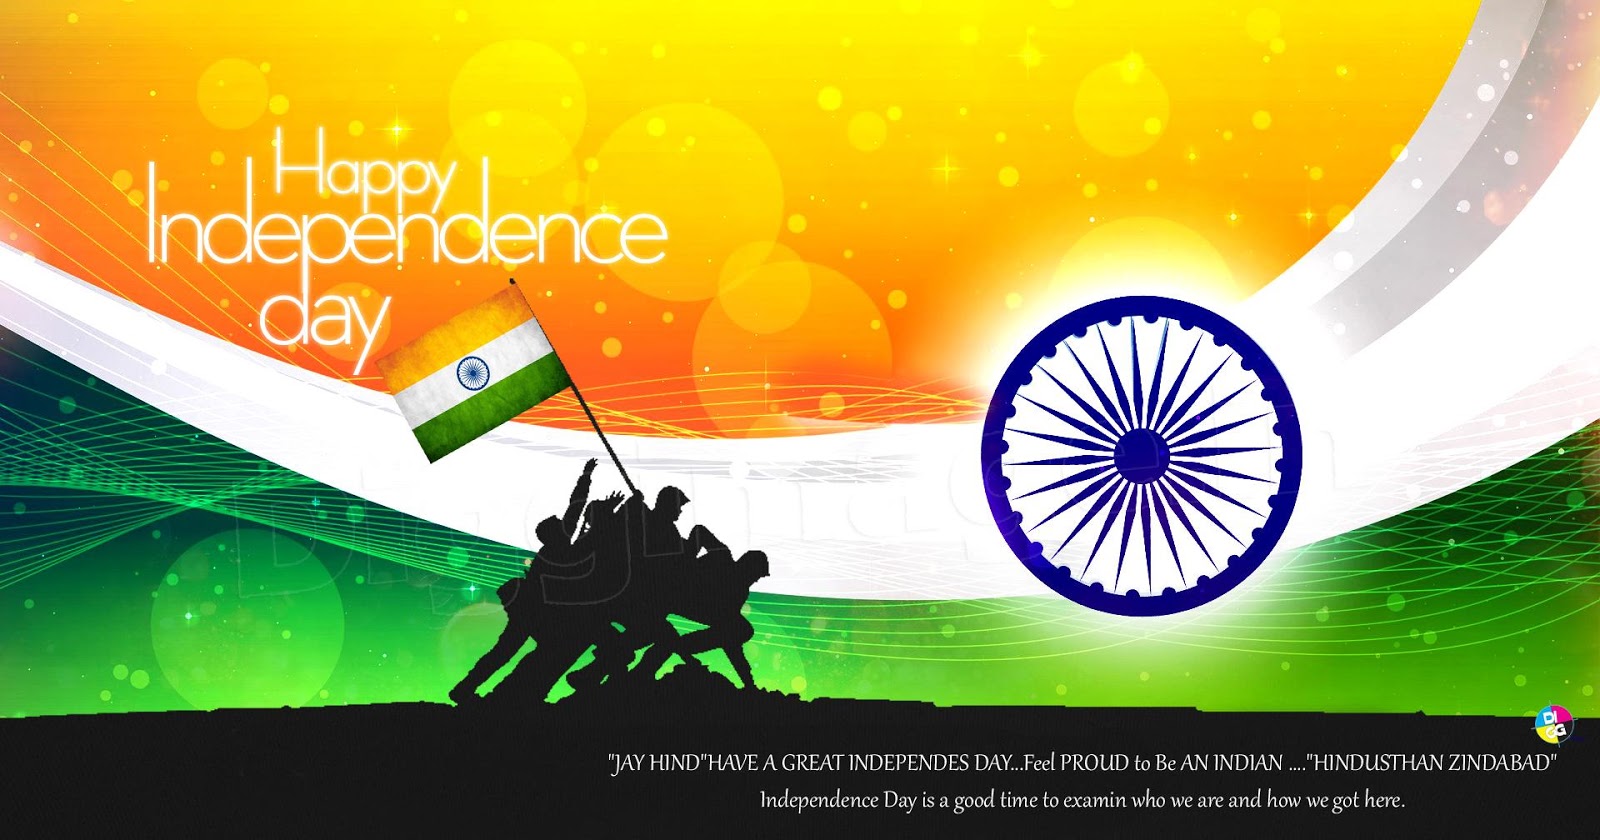 Happy Independence Day Greetings Wallpaper Image And